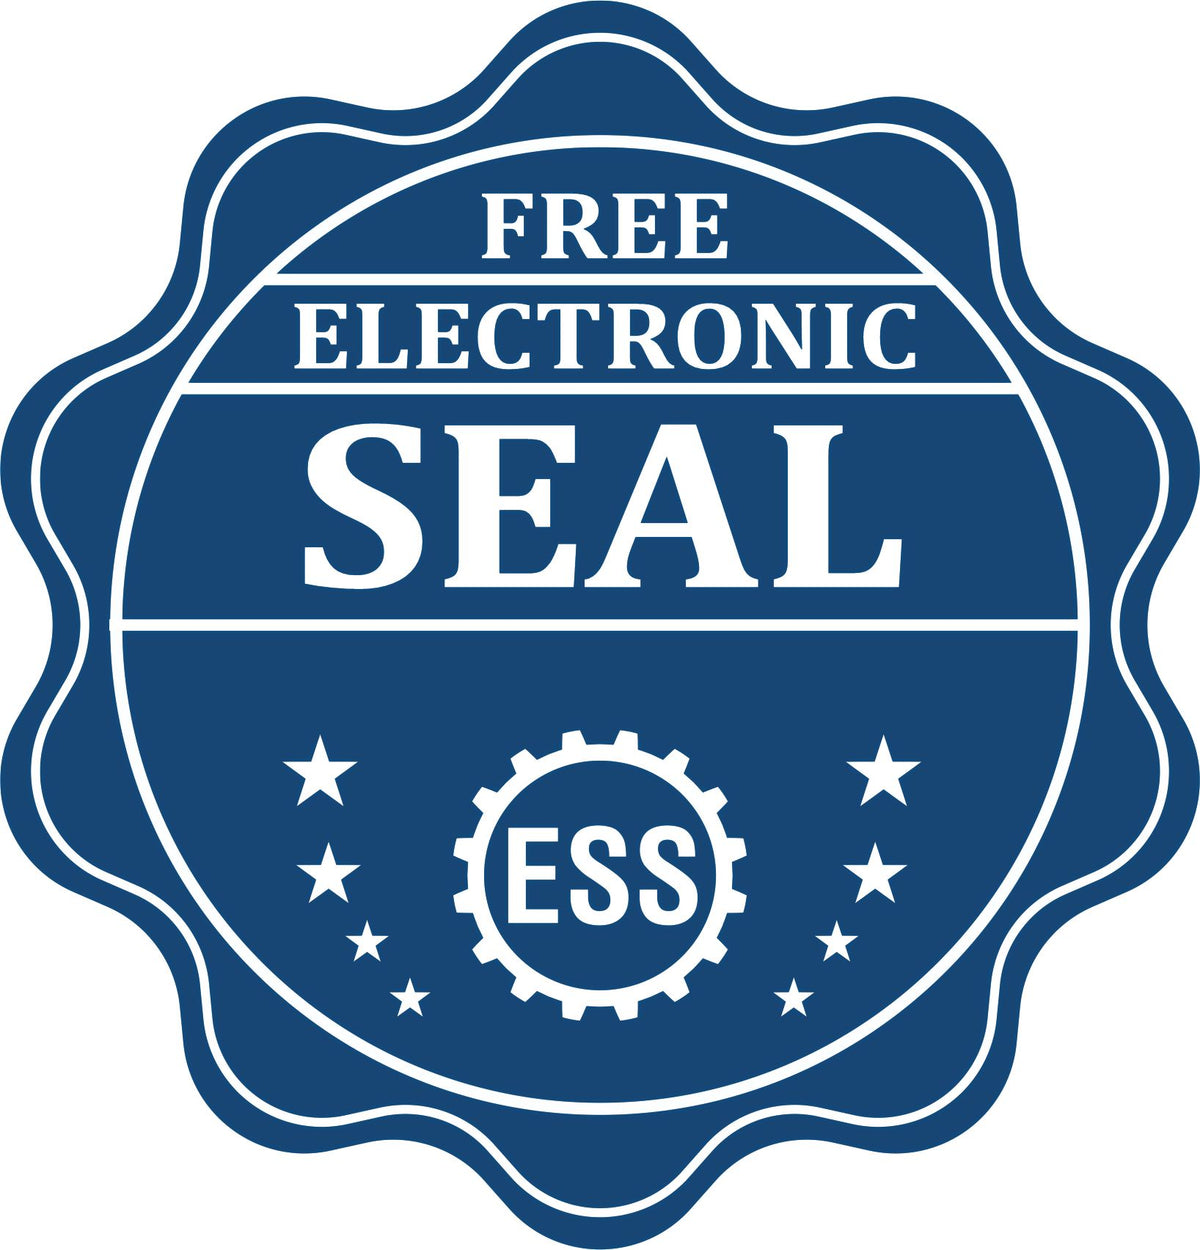 A badge showing a free electronic seal for the Handheld South Dakota Architect Seal Embosser with stars and the ESS gear on the emblem.